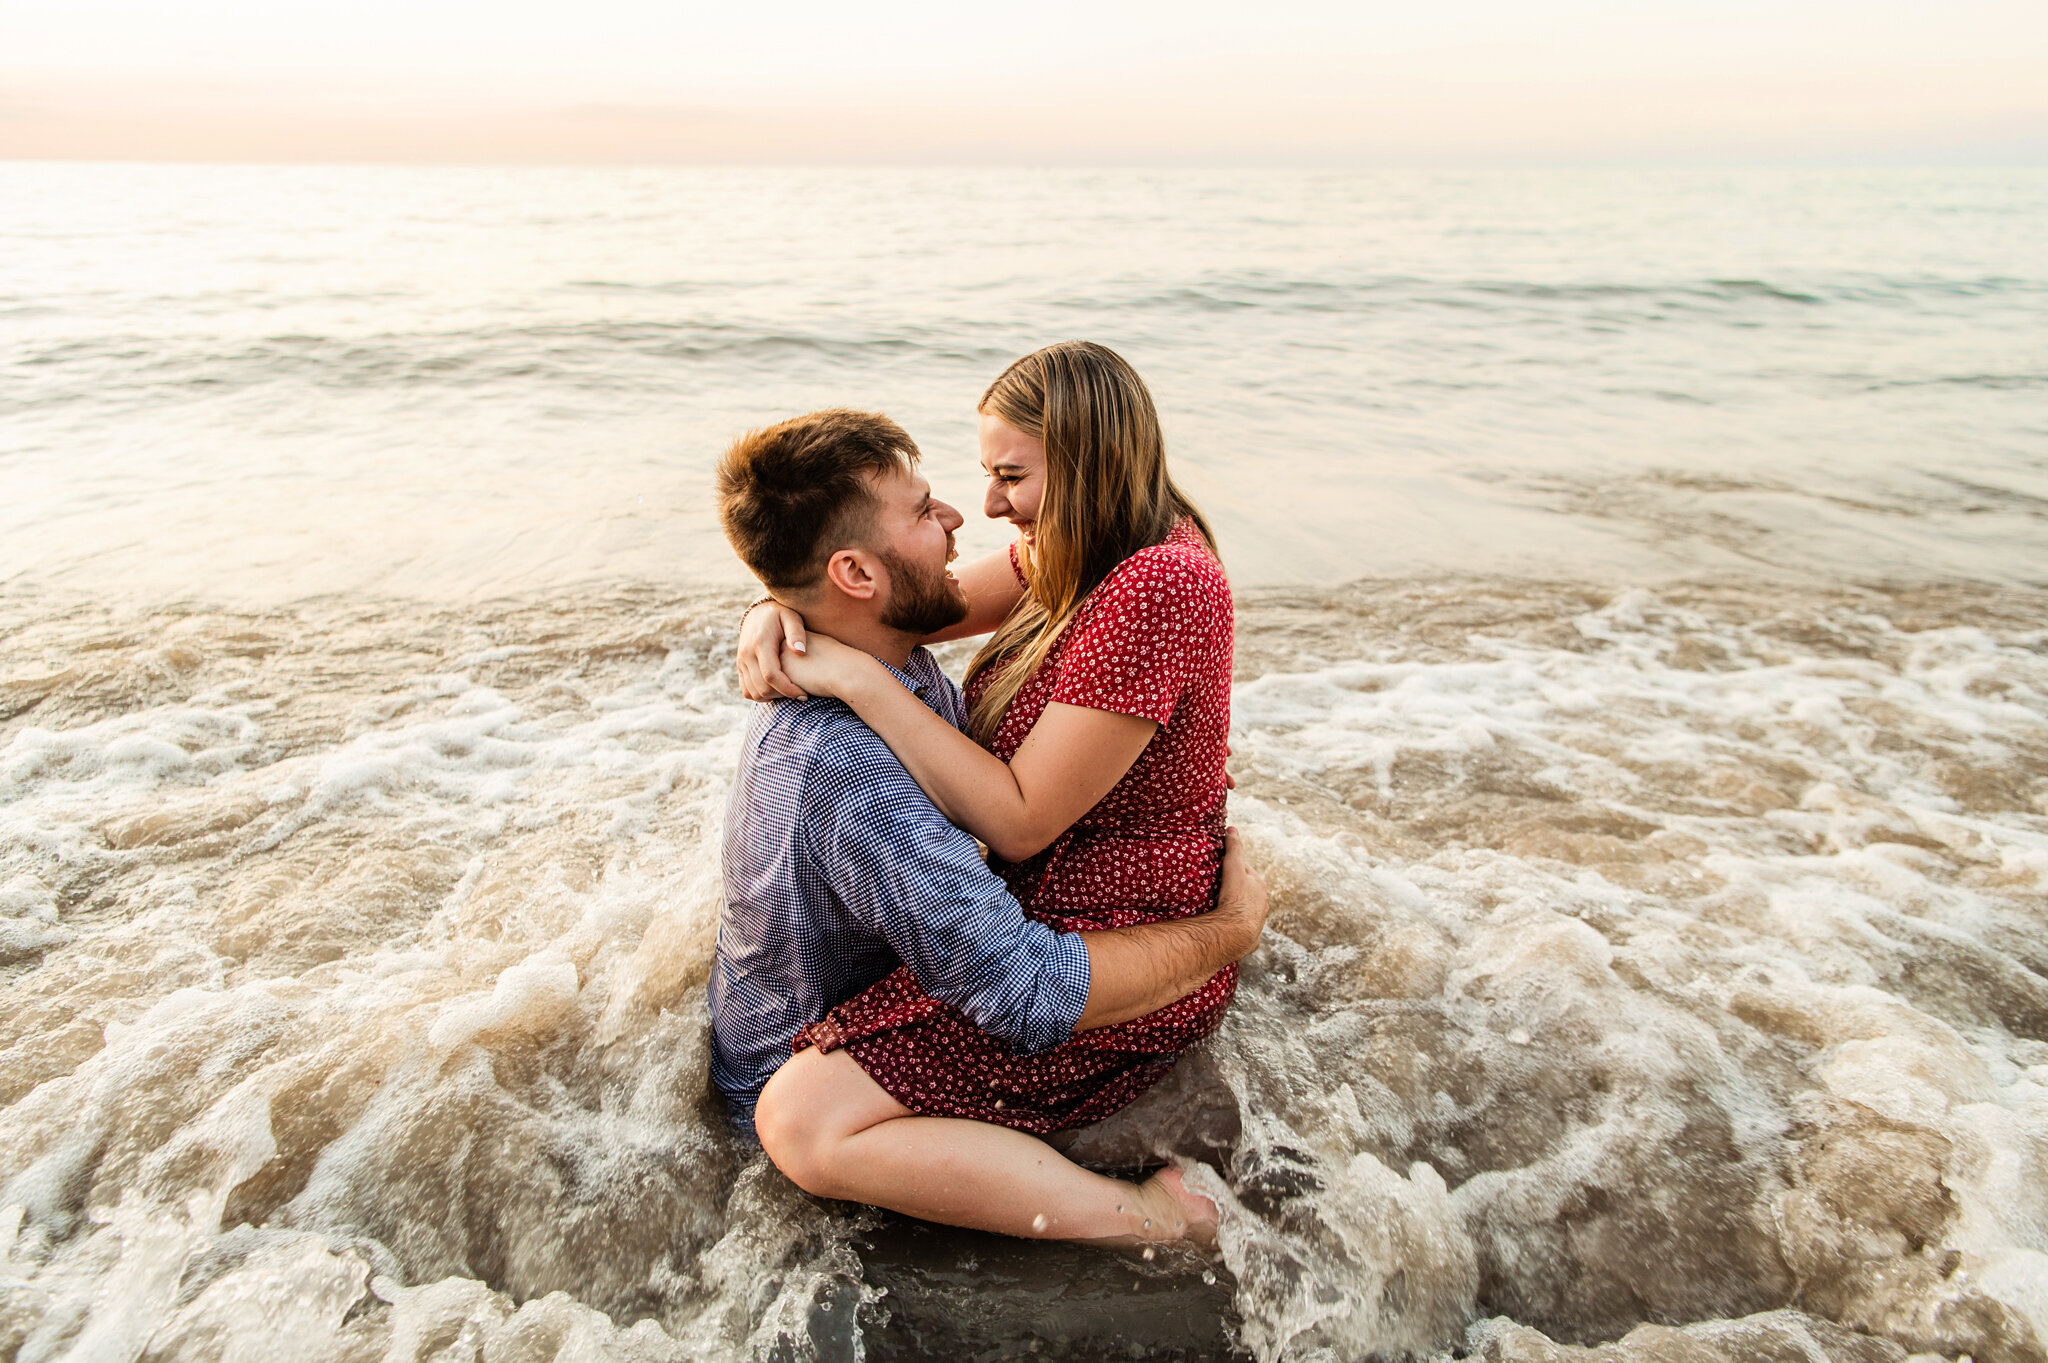 Chimney_Bluffs_State_Park_Rochester_Engagement_Session_JILL_STUDIO_Rochester_NY_Photographer_7258.jpg